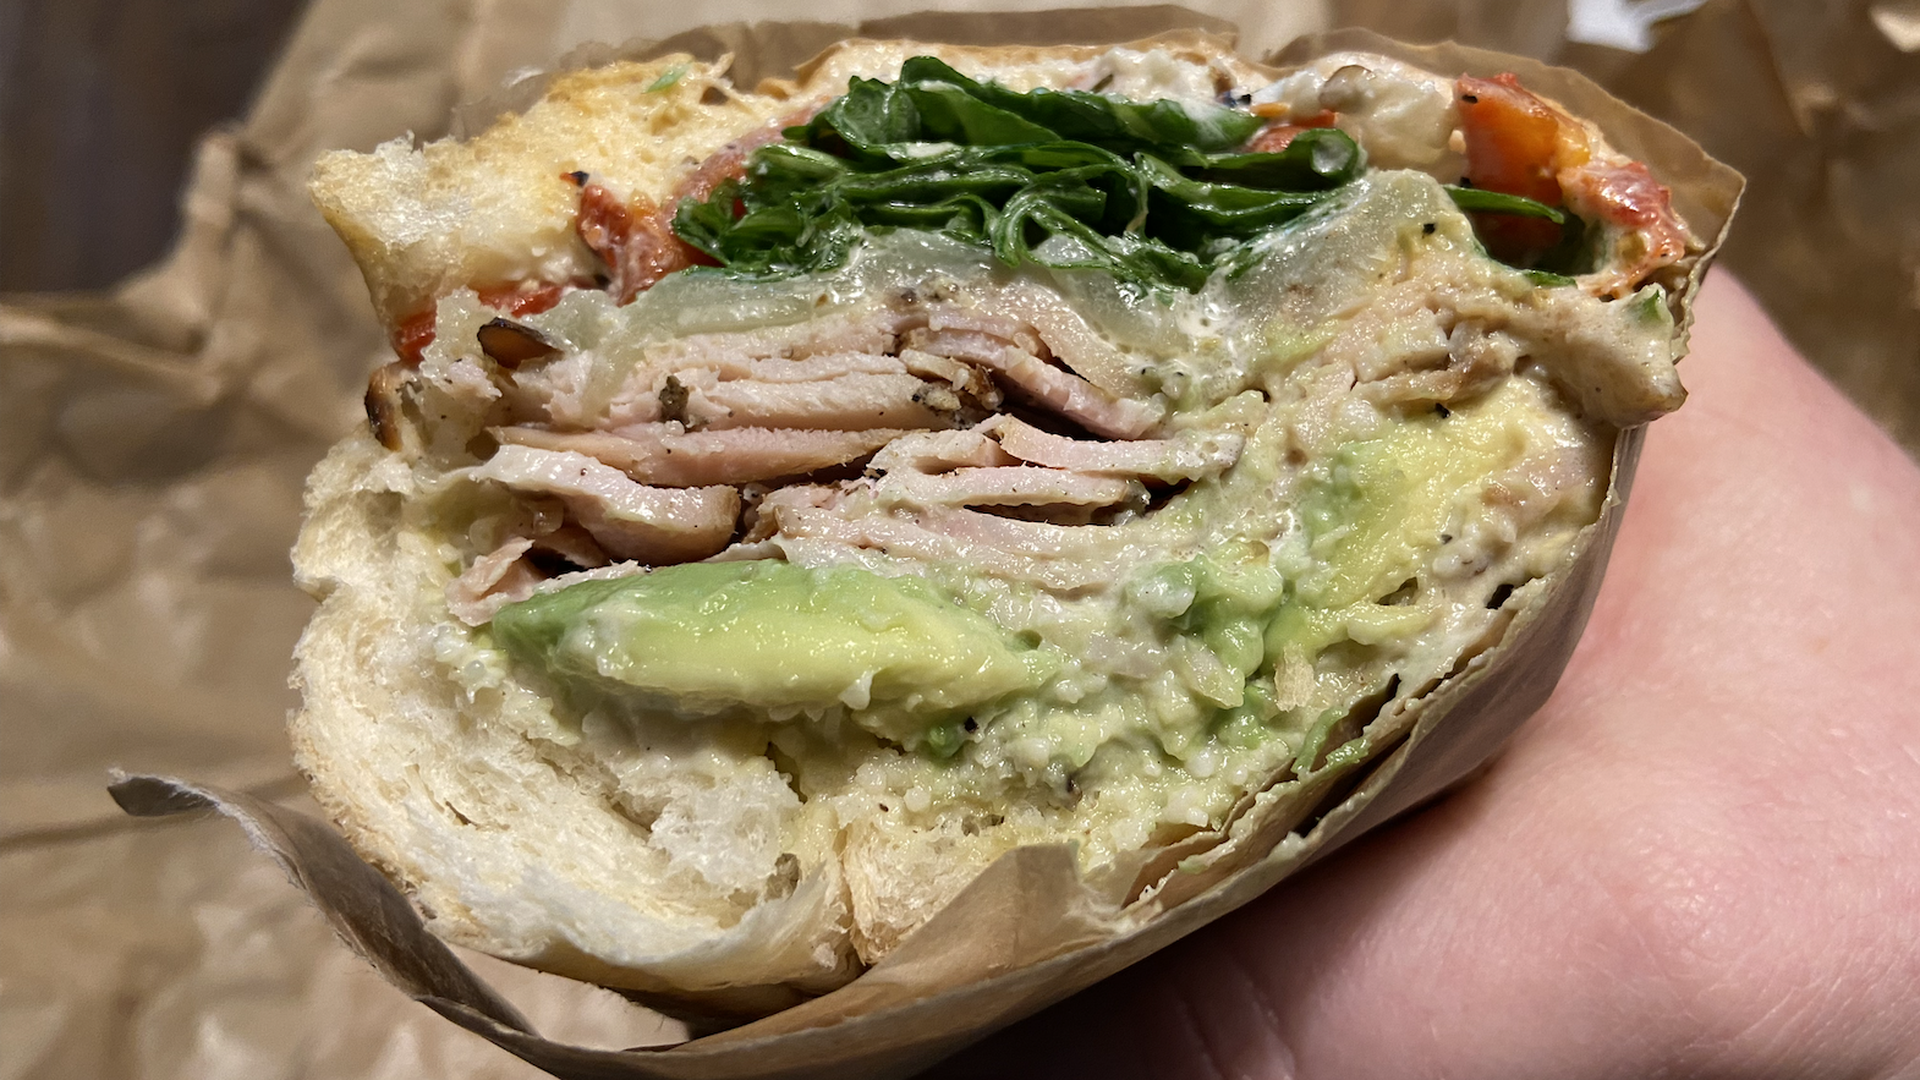 A hand holds a turkey subway sandwich bursting with sliced meat, avocado and parmesan peppercorn dressing